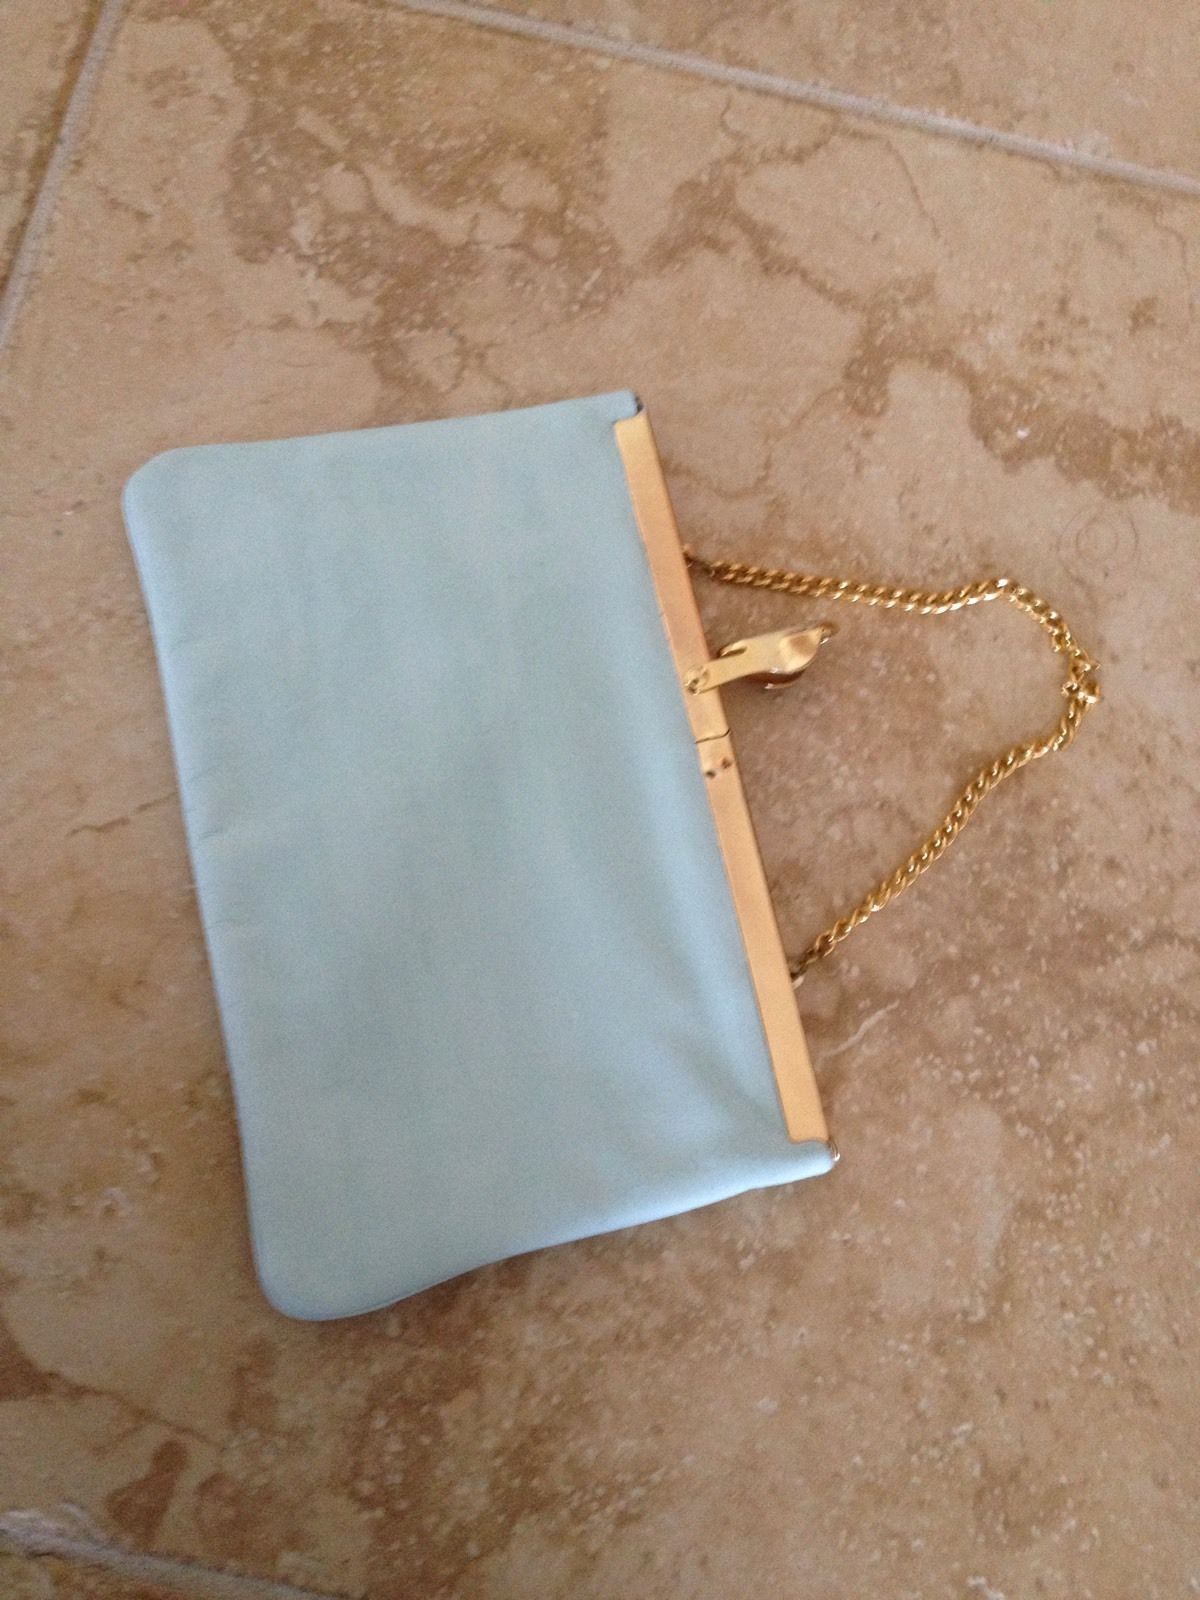 mint colored clutch purse with chain strap mint condition - Handbags ...